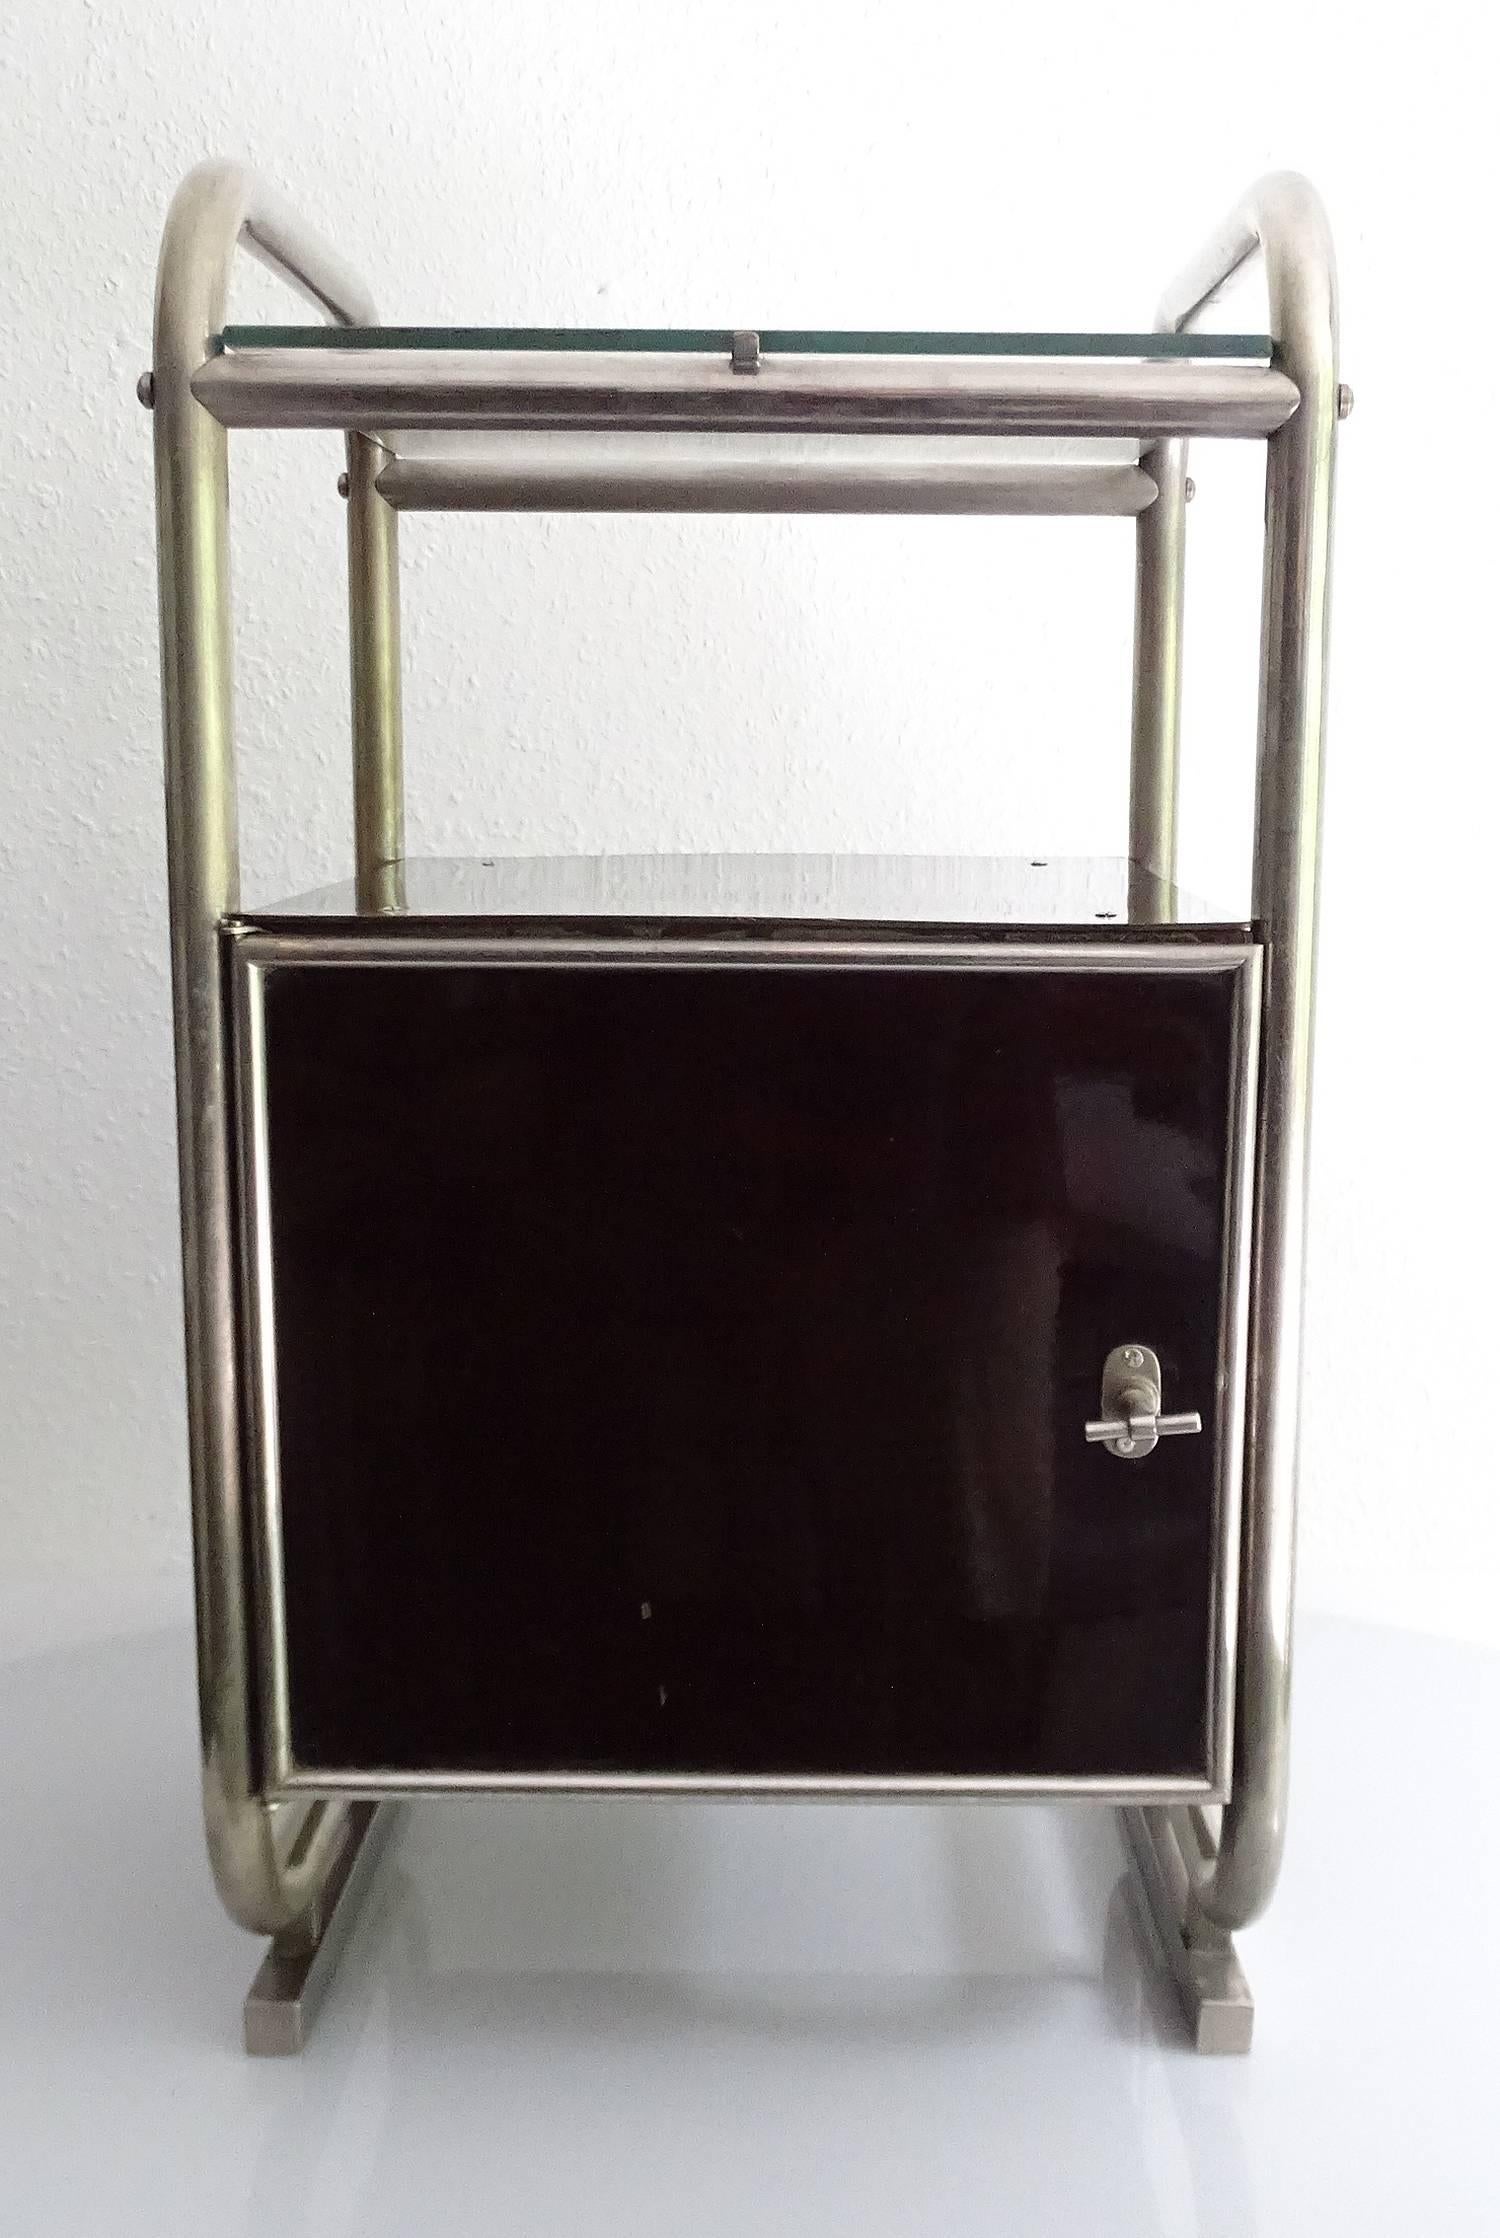 Extremely rare pair of original 1930s Bauhaus design bedside tables / nightstands, tubular construction on skid base with glass plate, core metal storage box coated with bakelite plates. This is extremely unusual as these were usually made out of